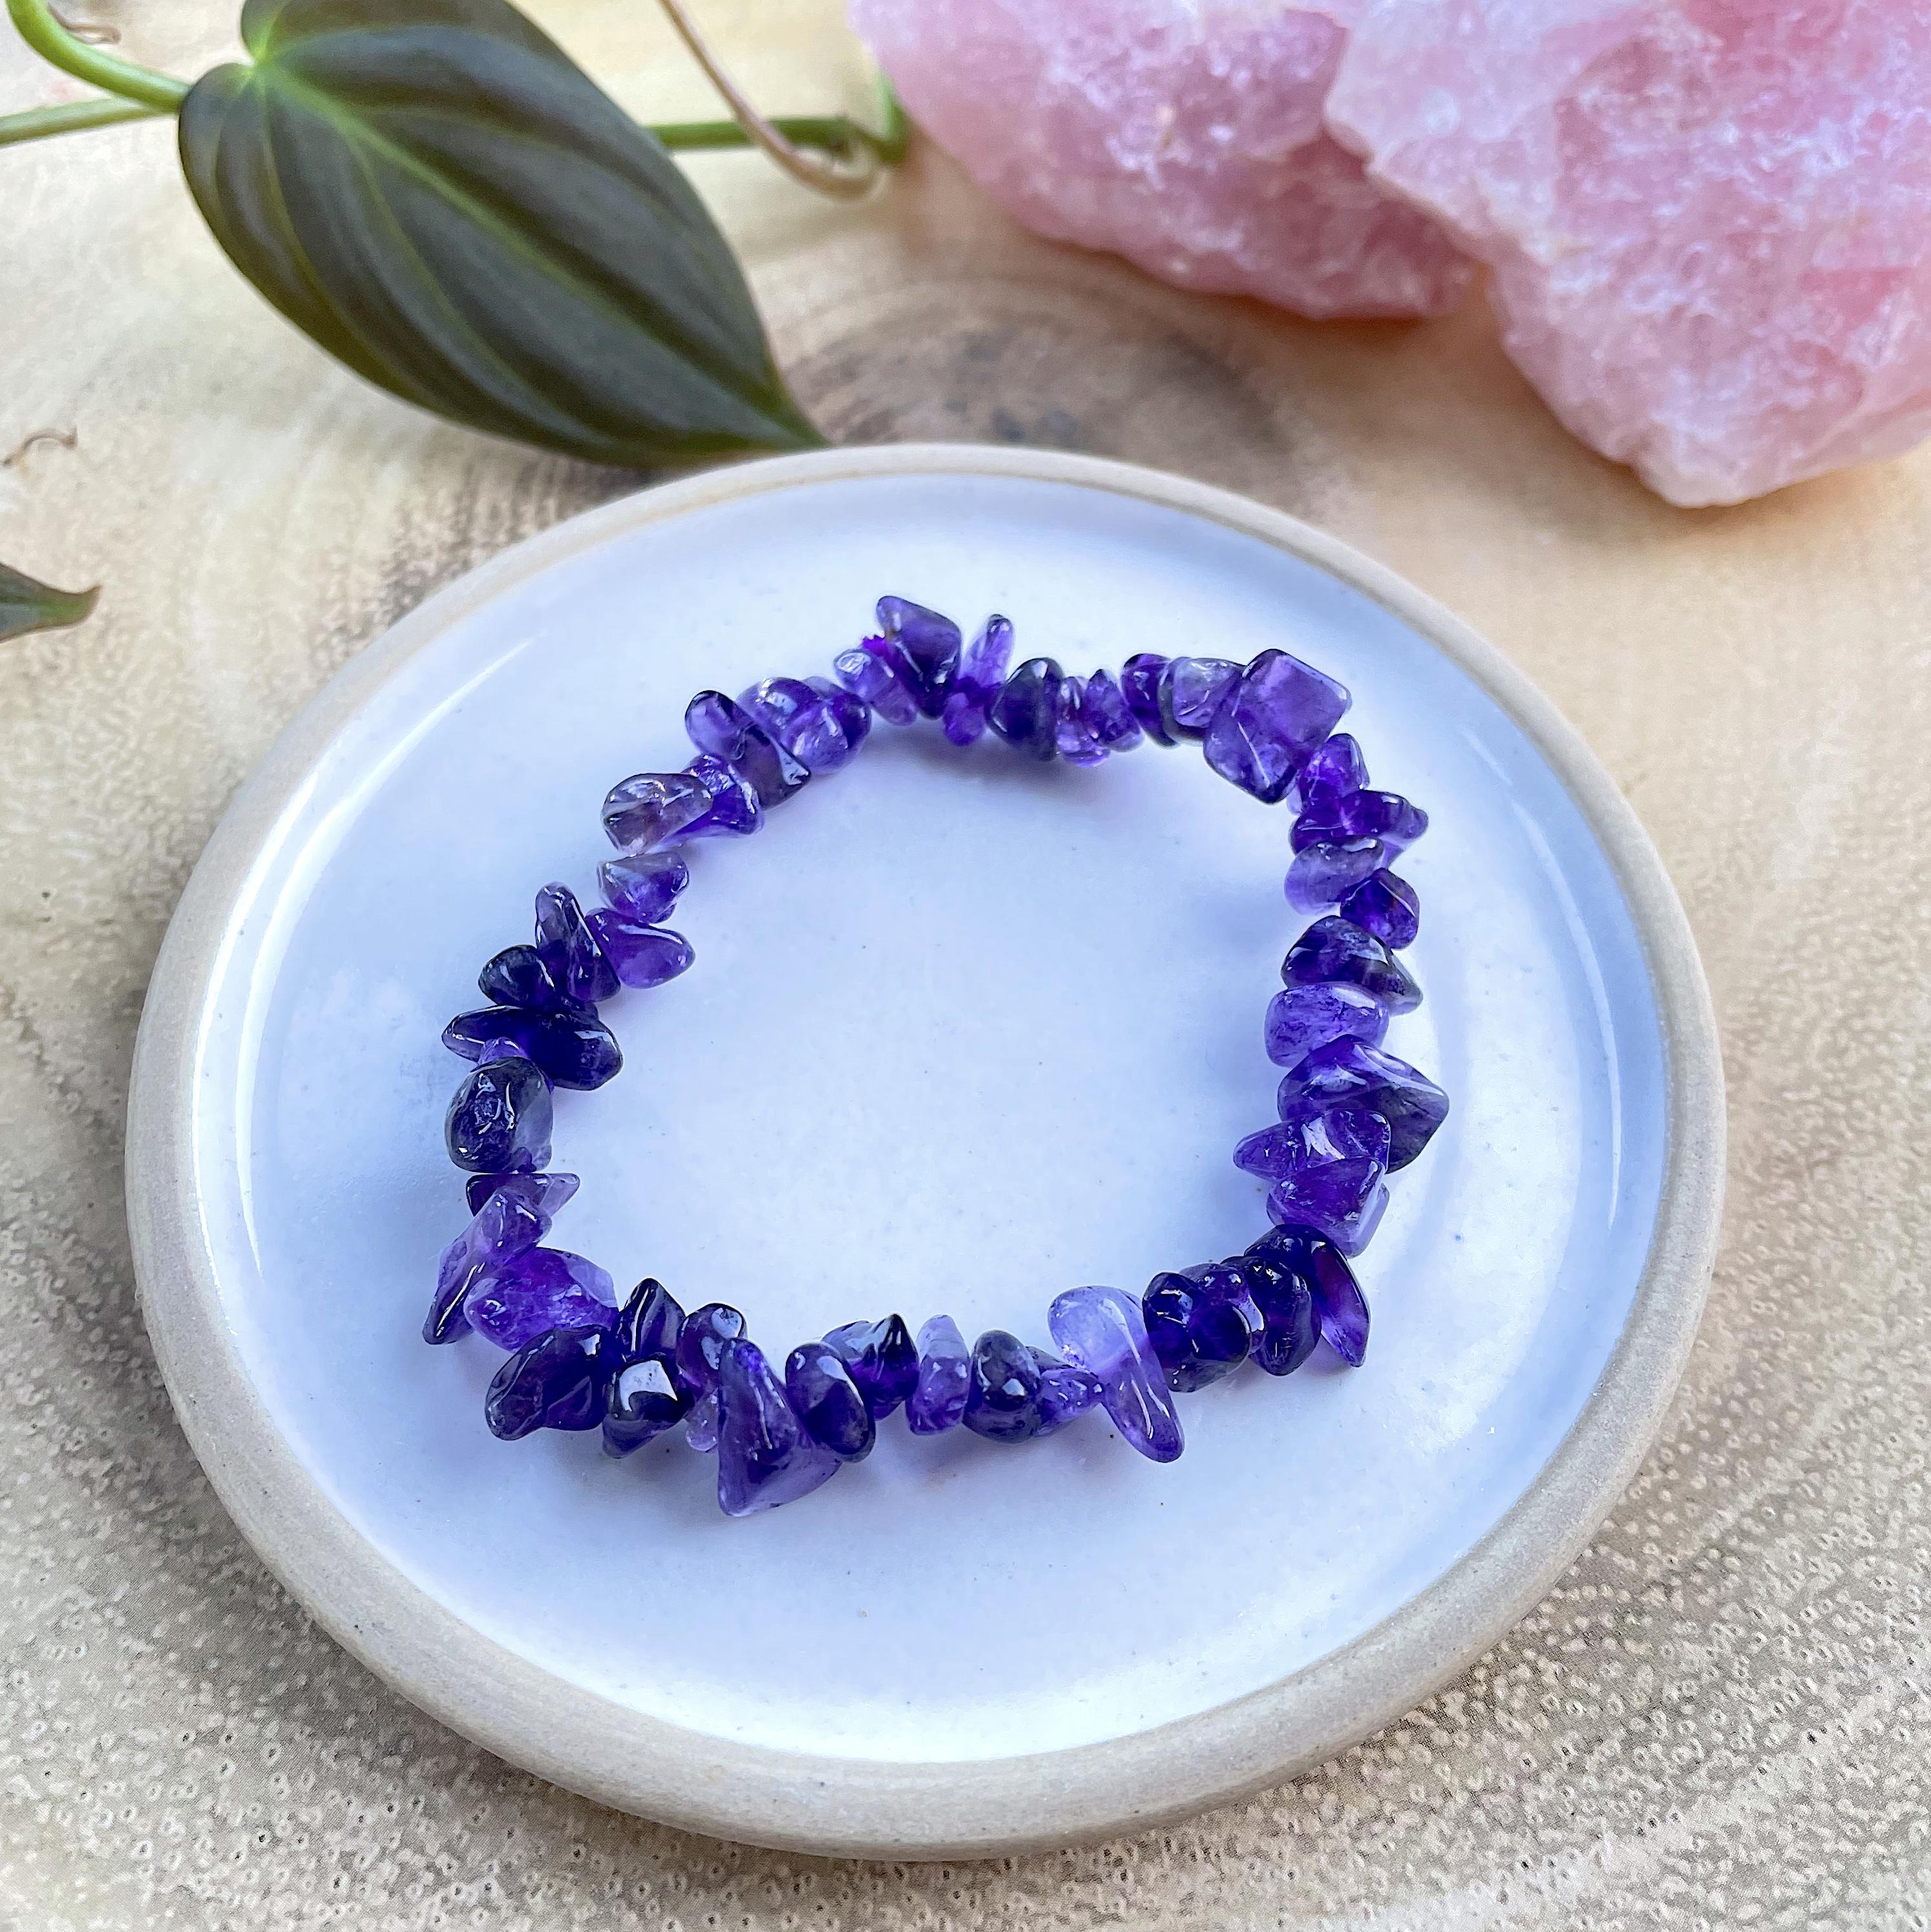 Amethyst Crystals and Jewelry for Sale - Energy Muse